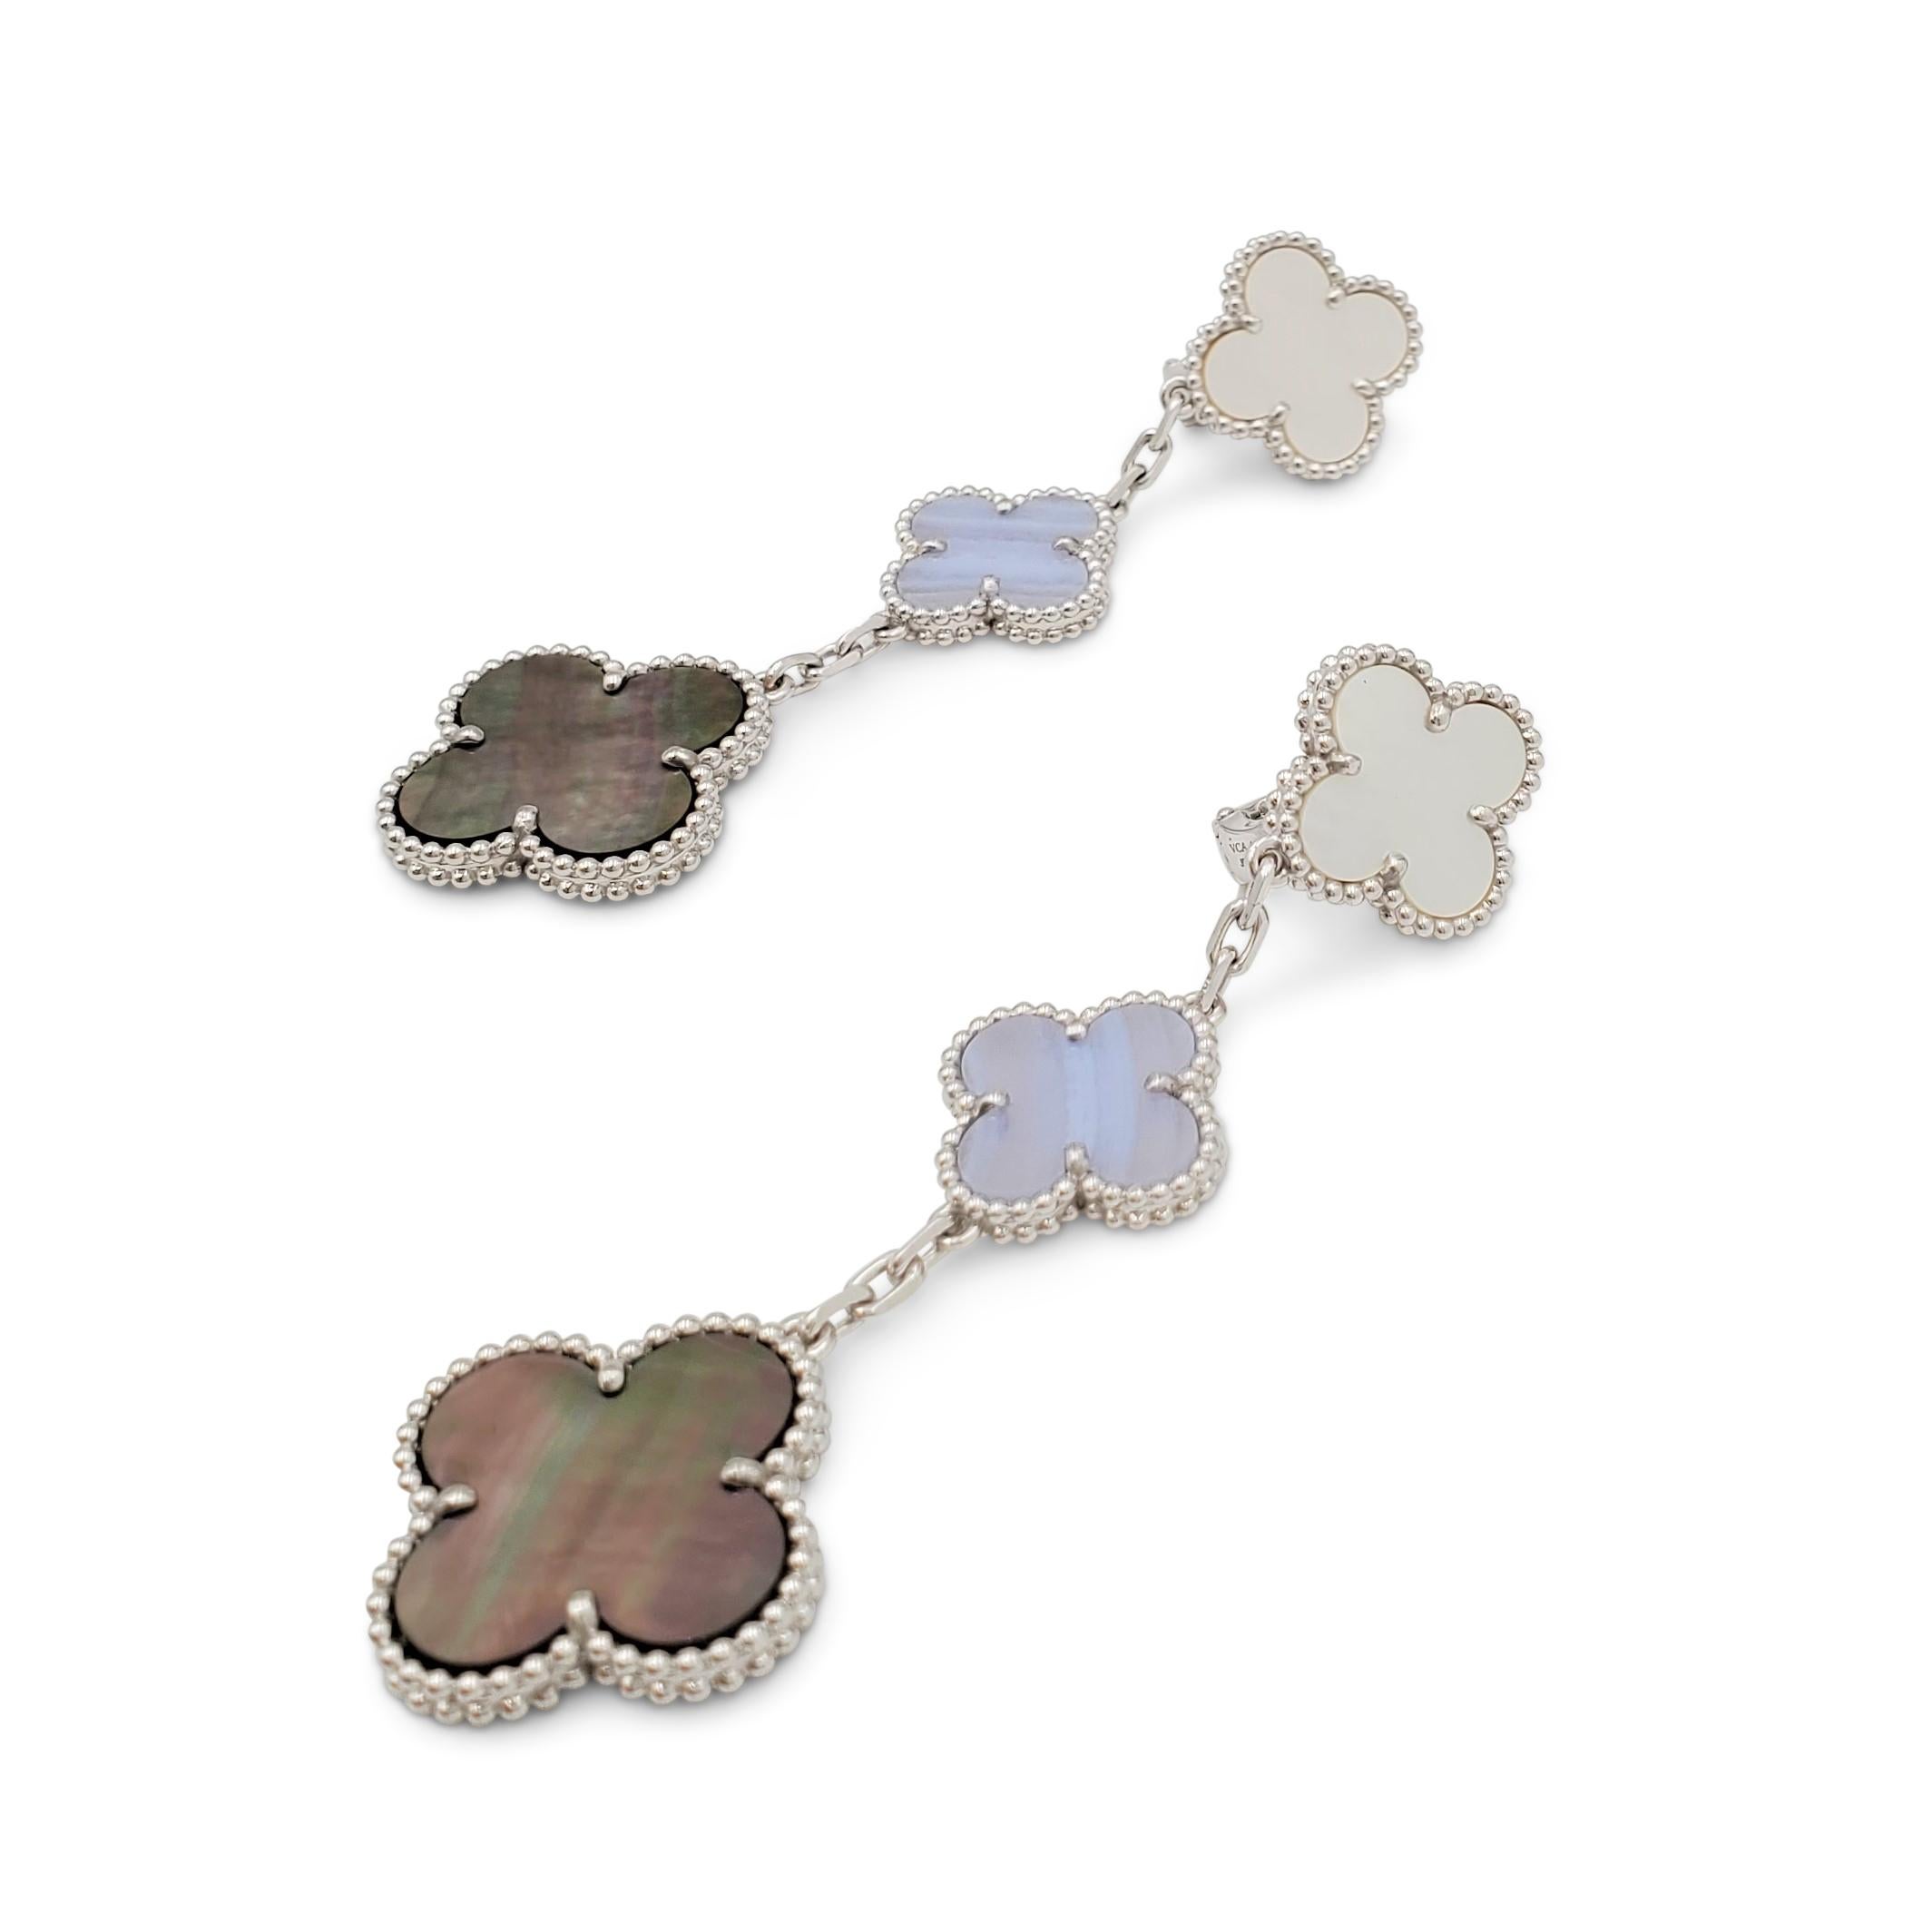 Authentic Van Cleef & Arpels 'Magic Alhambra' earrings crafted in 18 karat white gold feature three different sized motifs inspired by the cloverleaf in chalcedony and mother-of-pearl. Signed VCA, Au750, with serial number and hallmark. The earrings